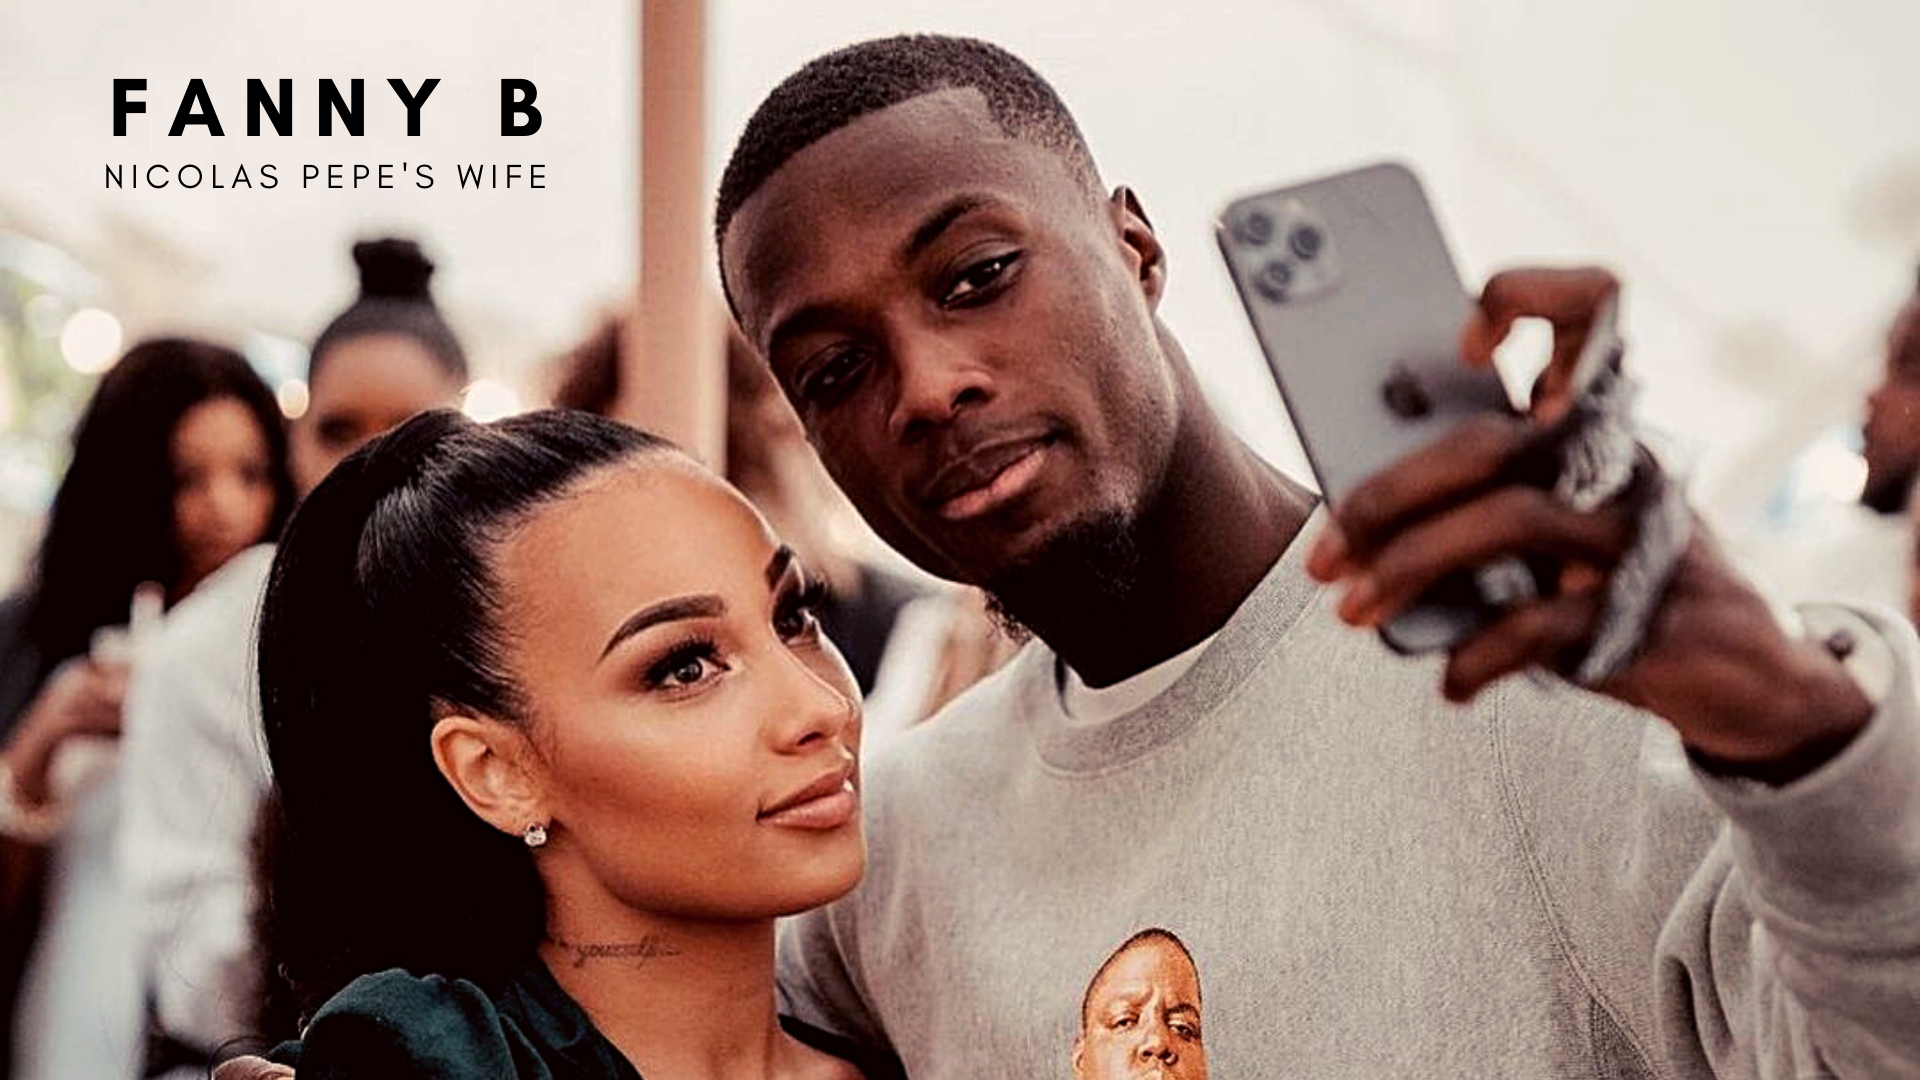 Nicolas Pepe with wife Fanny B. (Credit: Instagram)